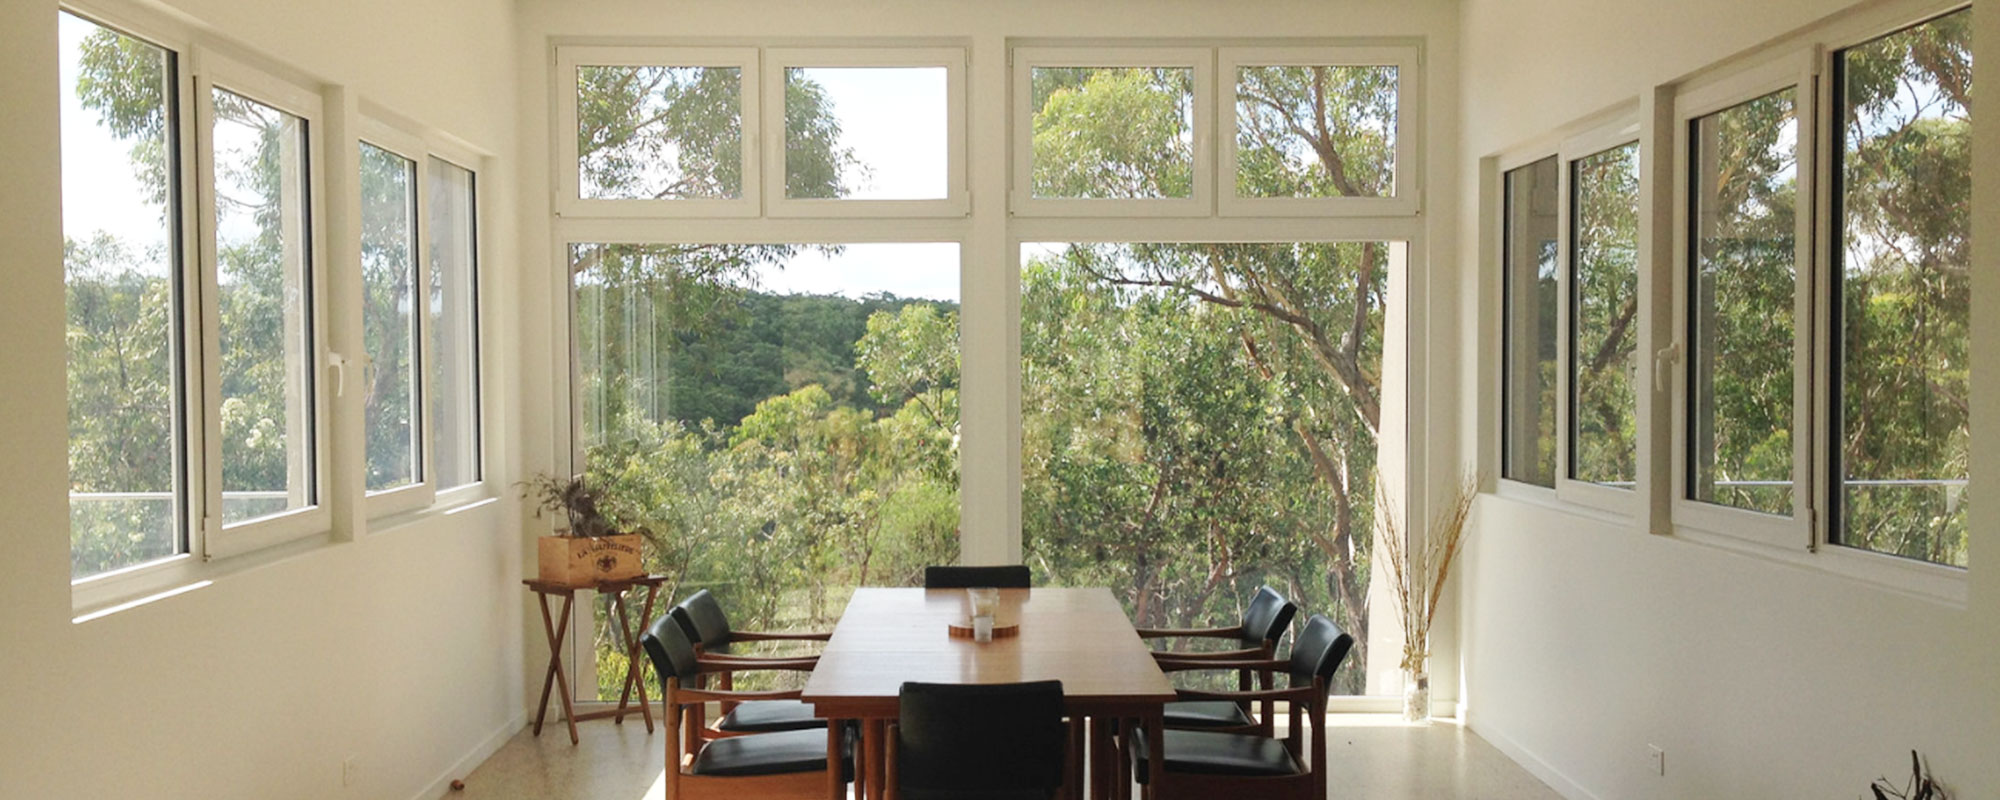 Plustec - Providing quality custom design and manufacturing of tilt and turn double-glazed windows for residential, commercial and industrial clients across Australia.